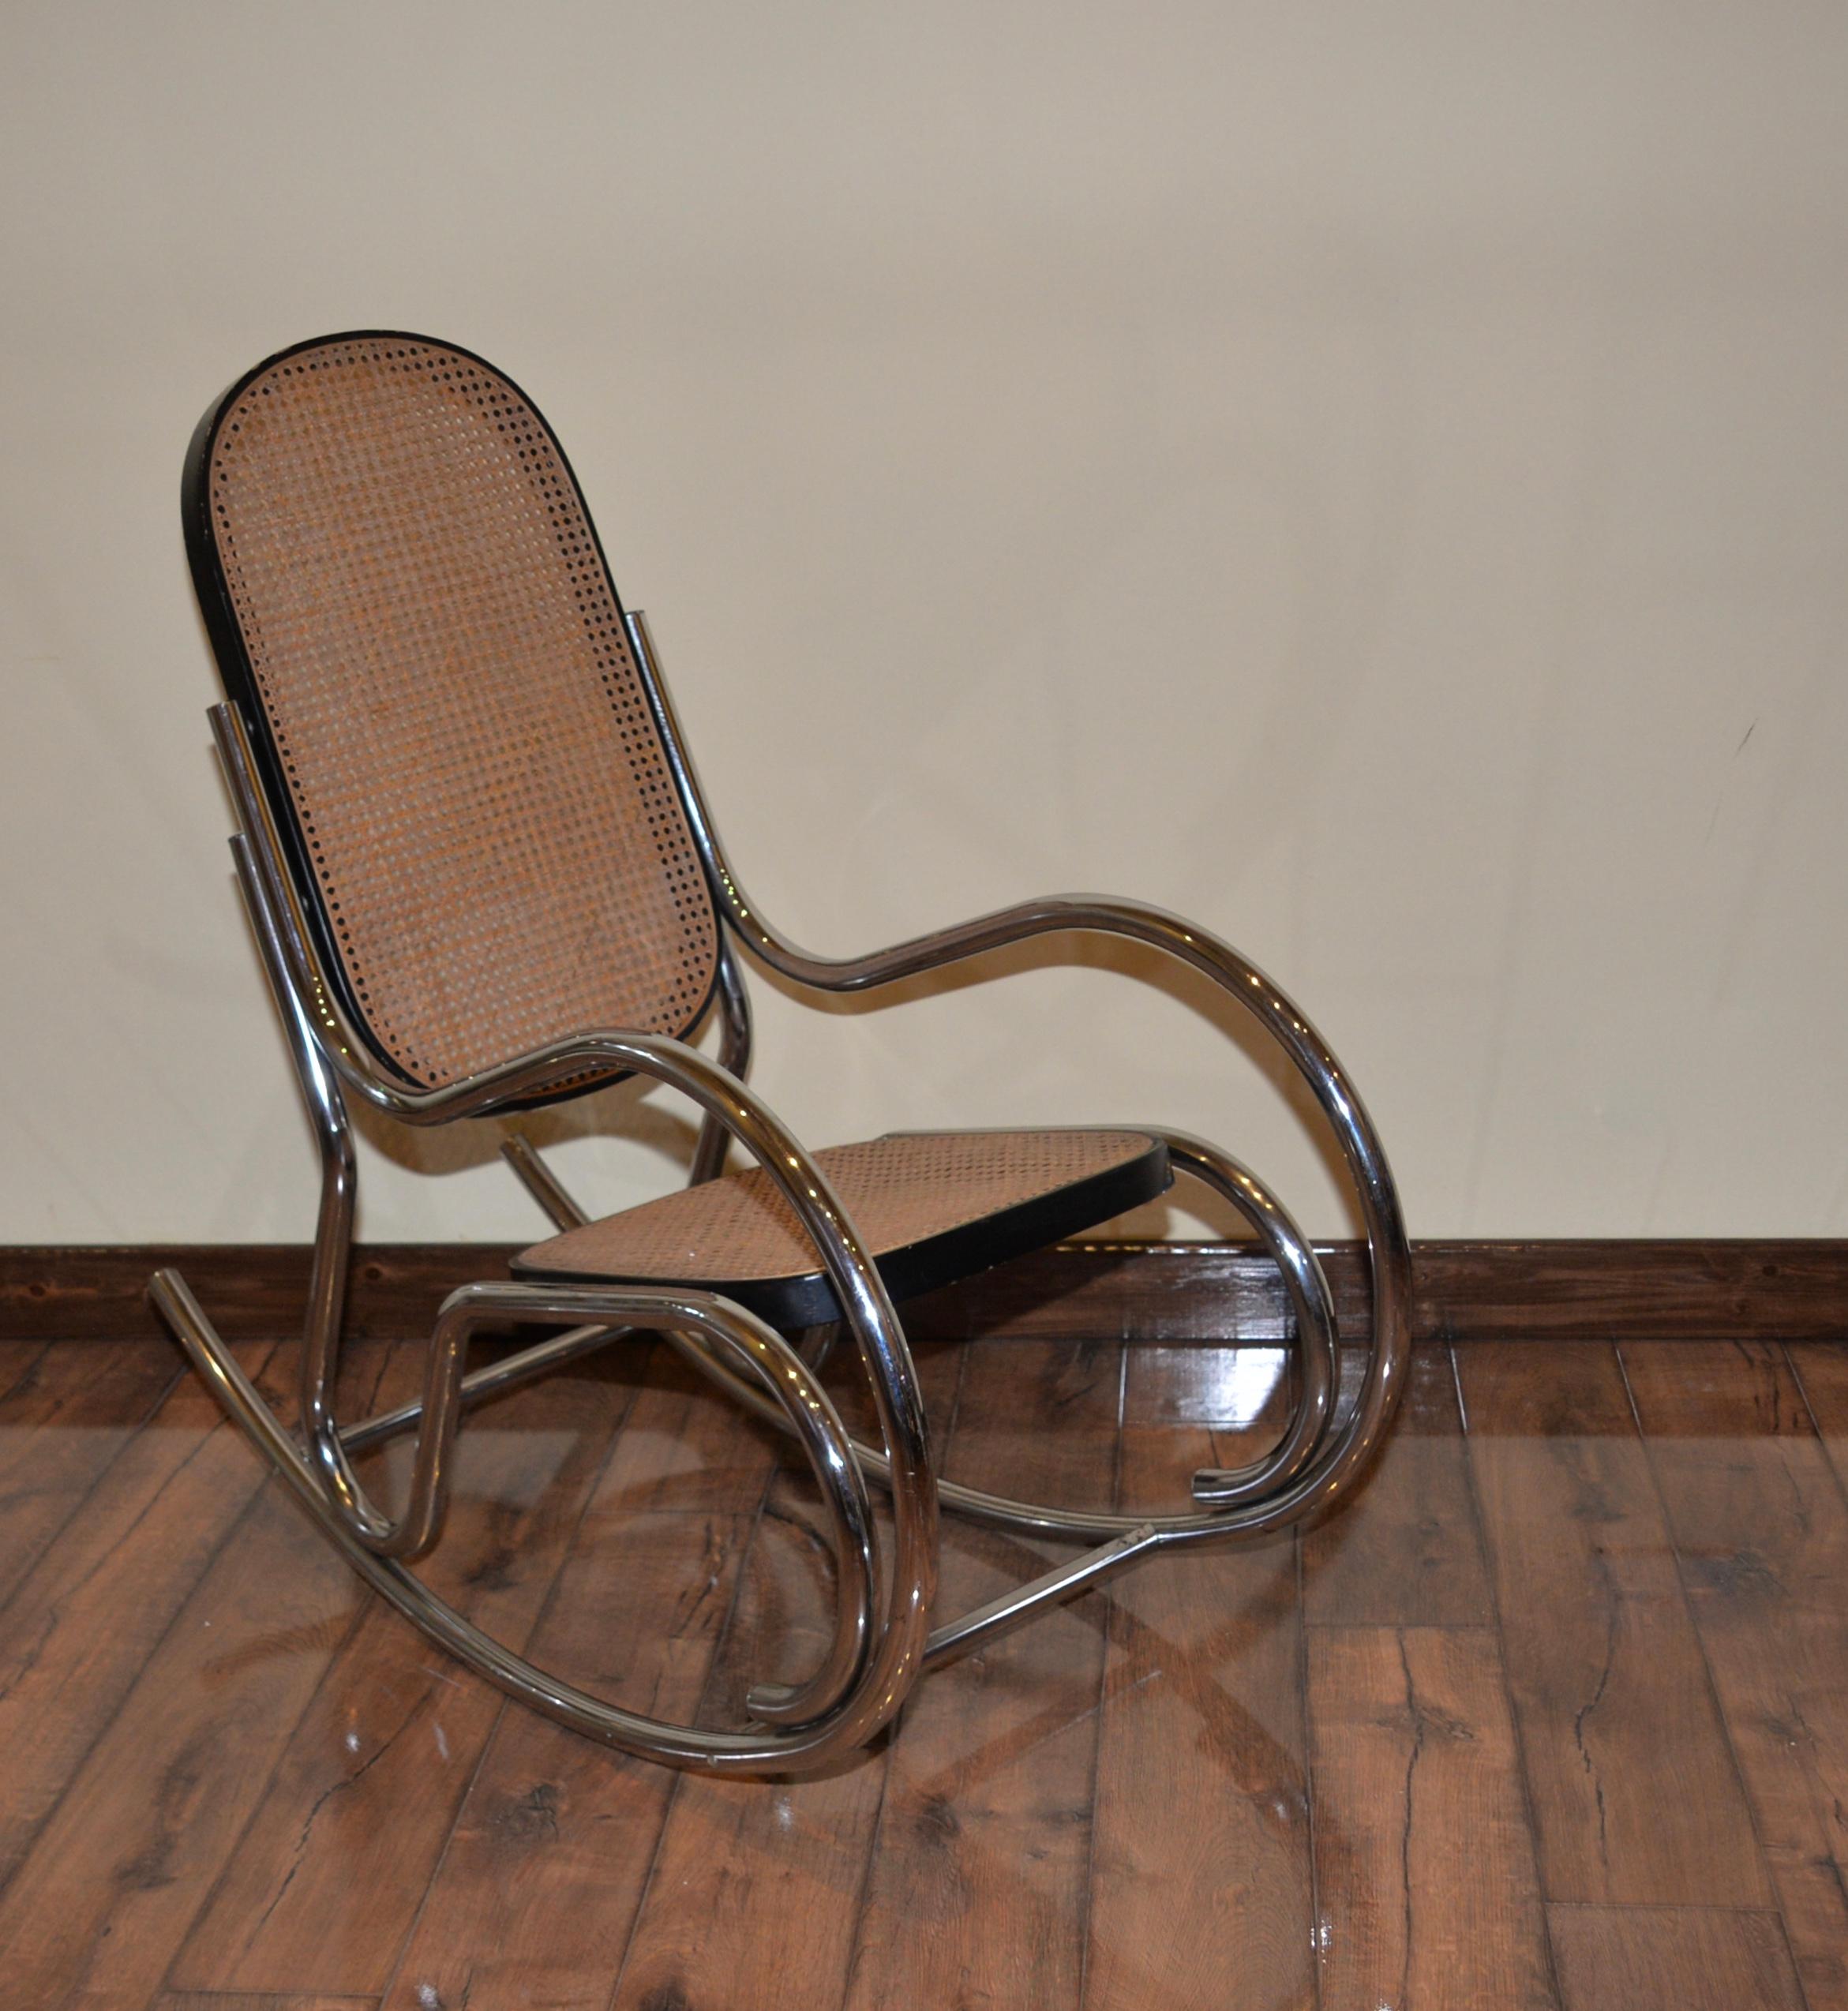 Vintage Marcel Breuer style scrolled rocking chair. A chrome tubular scrolled frame with a black wooden frame and a caned seat and backrest.
 